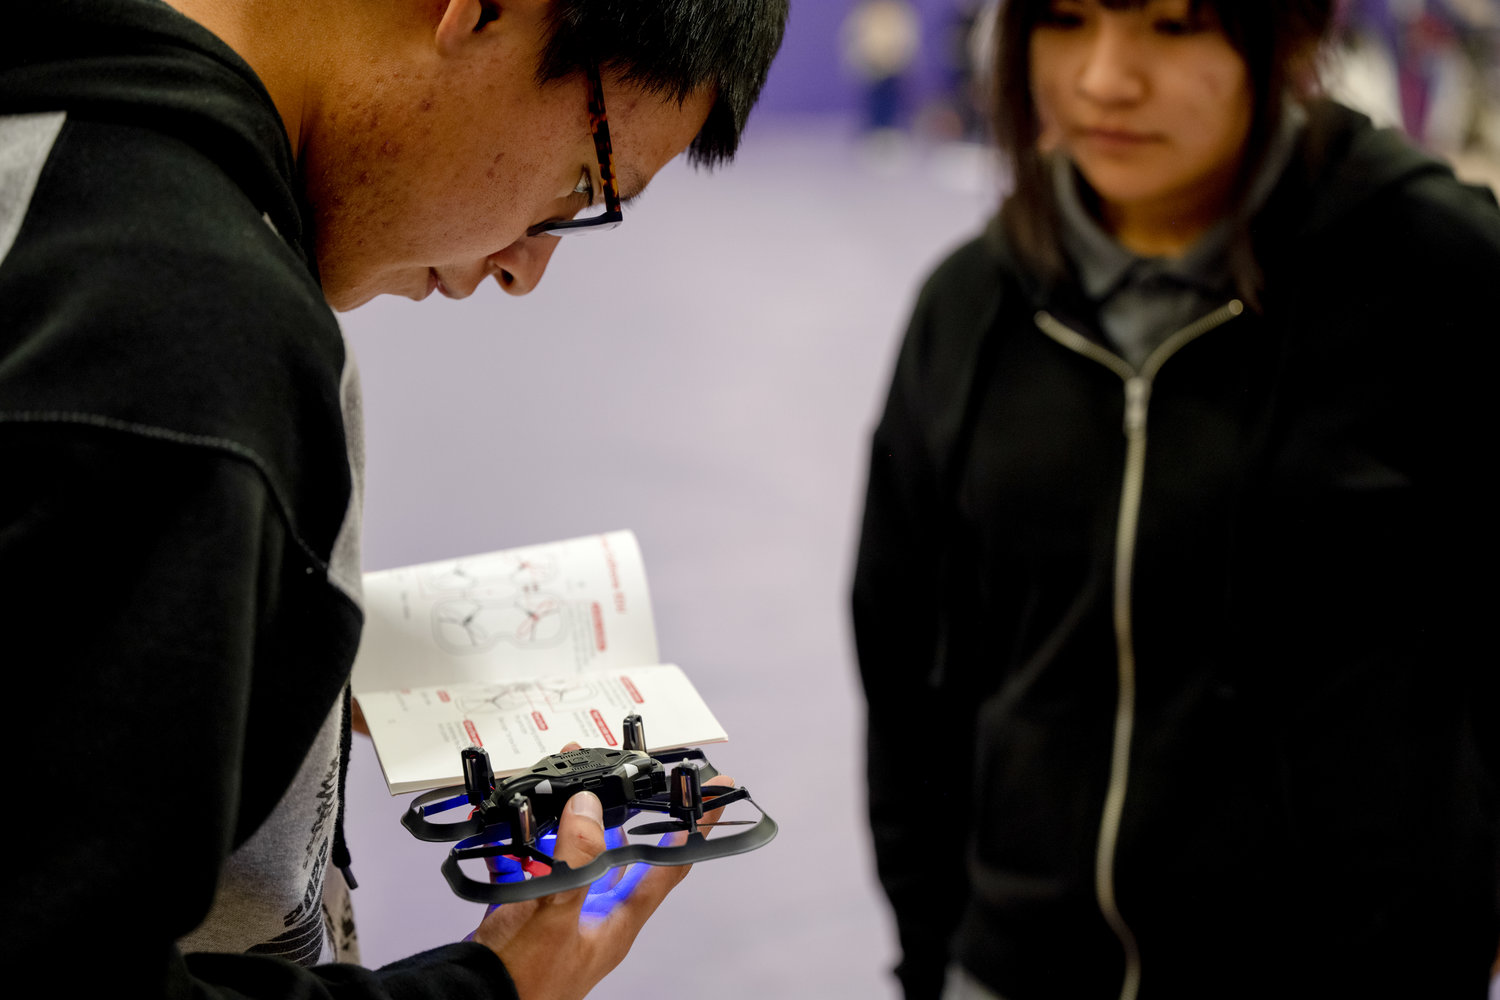 Clarence Sago, left, and Caydence Palmer, Mescalero Apache High School students, prepare their drones for the first Aerial Drone Competition at Mescalero Apache High School, Jan. 21, 2023. Two drones are allowed in the competition, the CoDrone EDU and the Parrot Mambo drone, each of which  has seven built-in sensors including an accelerometer, gyroscope, barometer, front range sensor, bottom range sensor, color sensor and an optical flow sensor. (U.S. Air Force photo by Senior Airman Antonio Salfran)